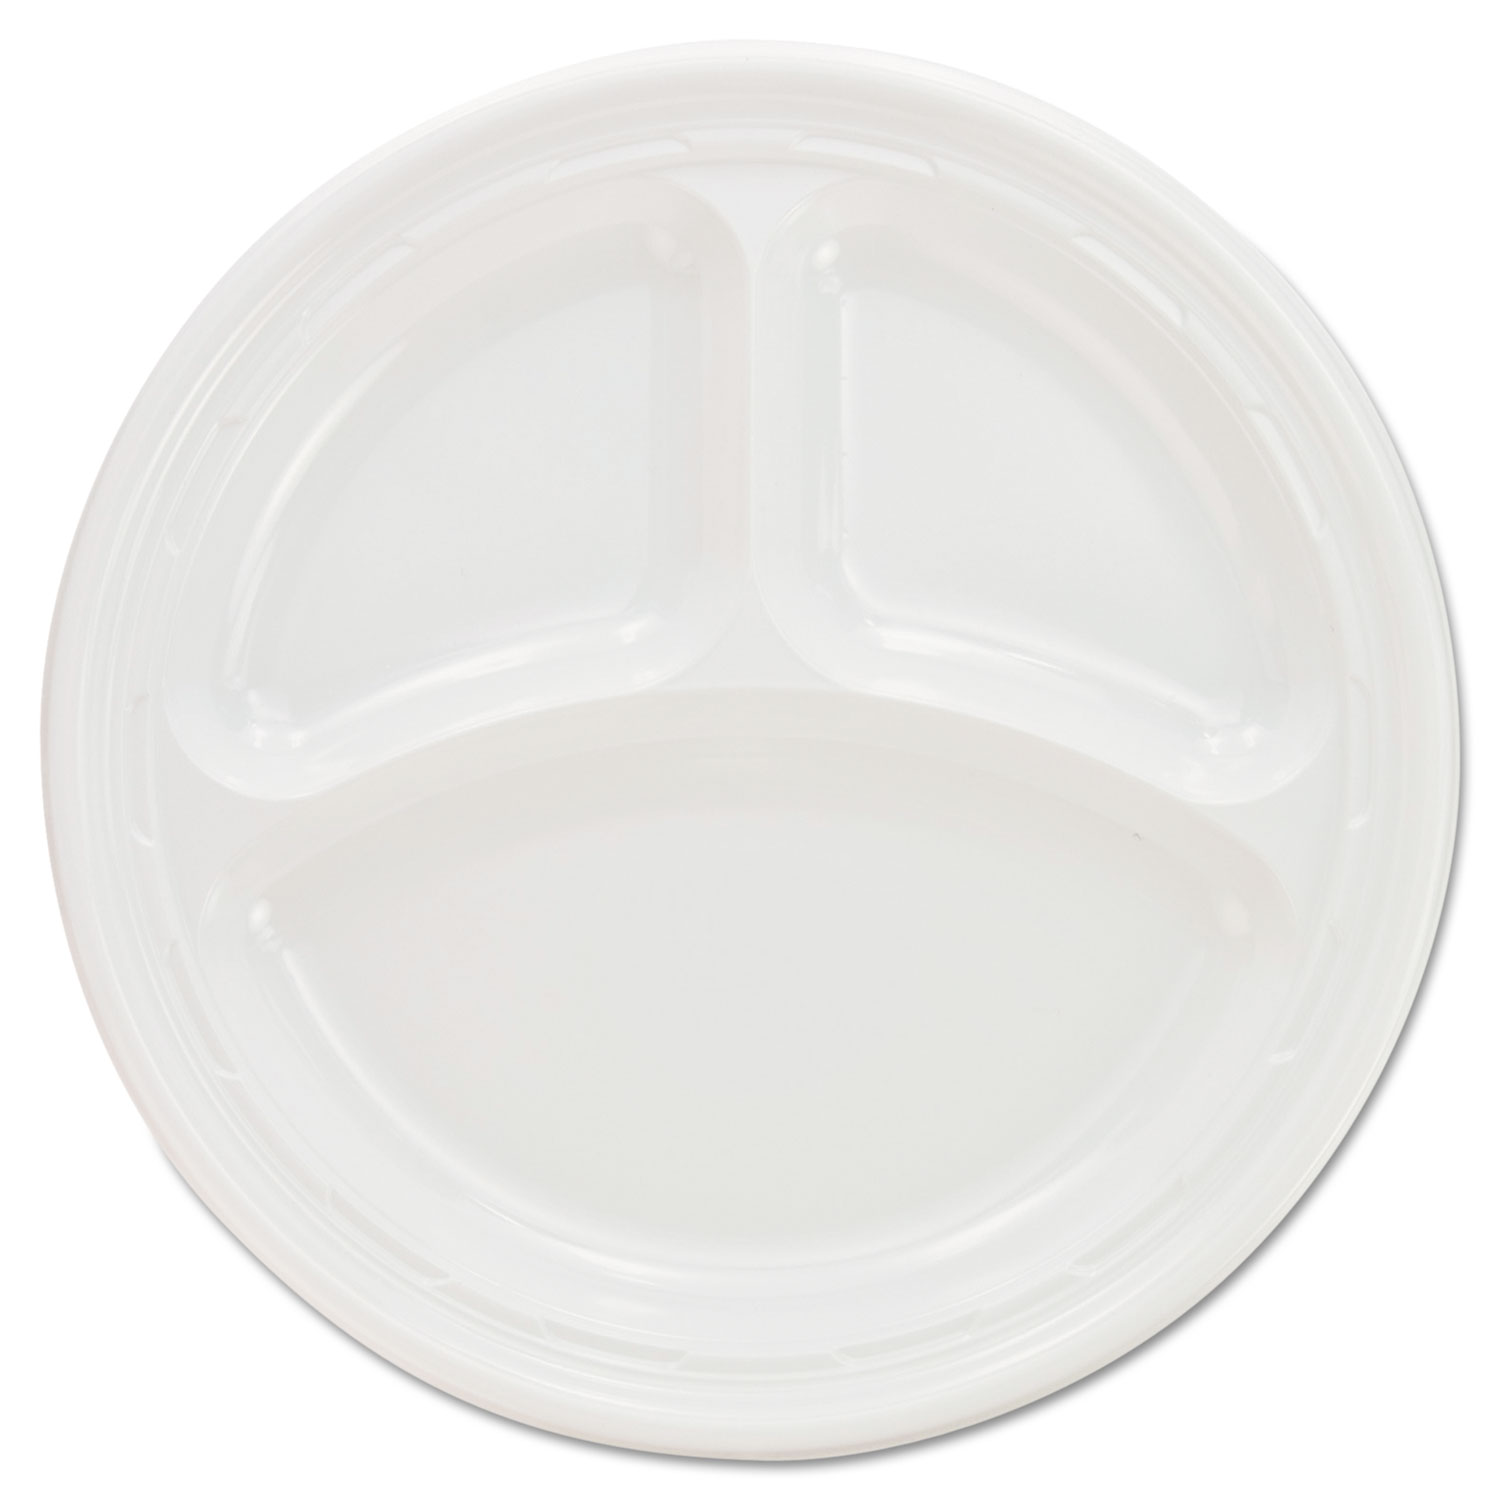 Plastic Plates, 9 Inches, White, 3 Compartments, Round, 125/Pack